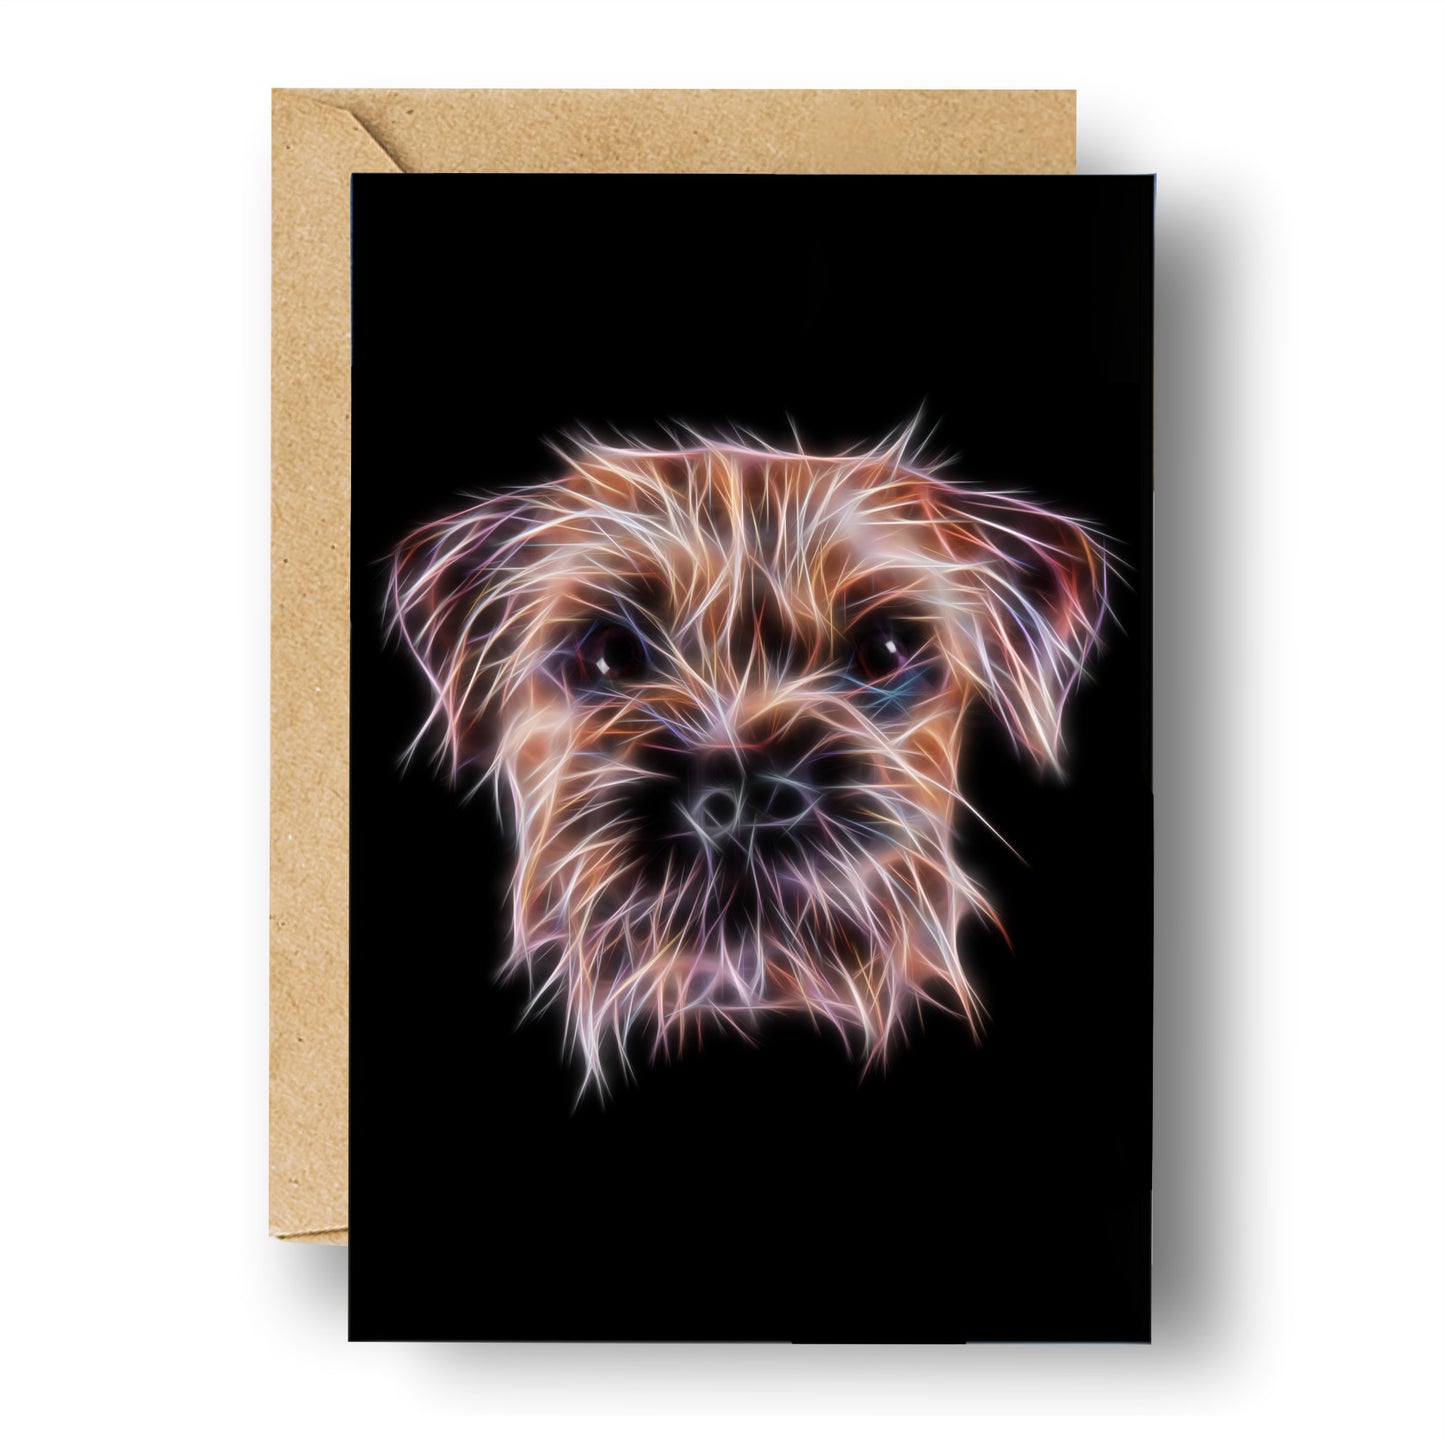 Border Terrier Greeting Card Blank Inside for Birthdays or any other Occasion